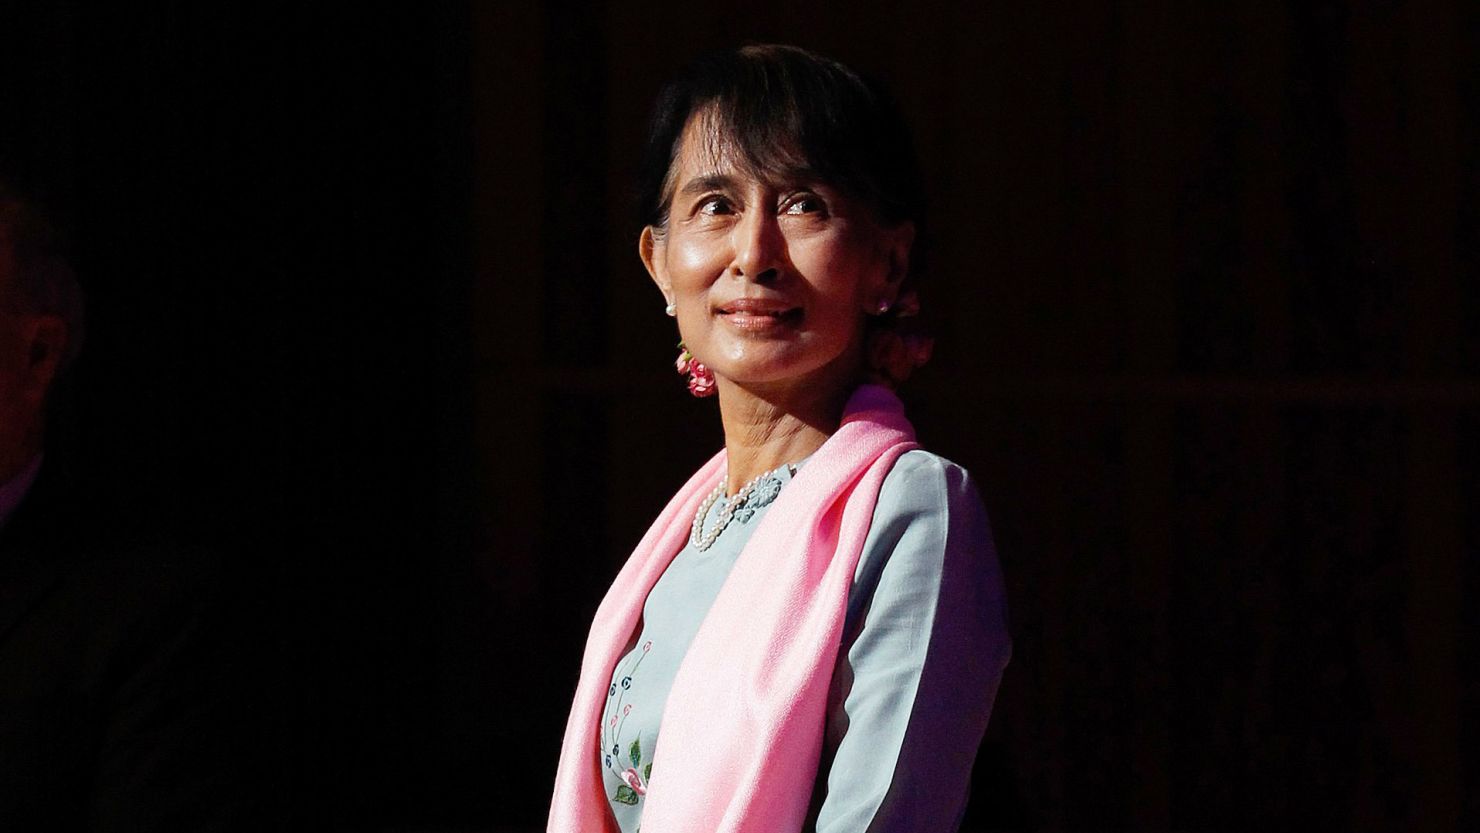 Aung San Suu Kyi, here at an event in London, made a triumphant return to the world stage this week.